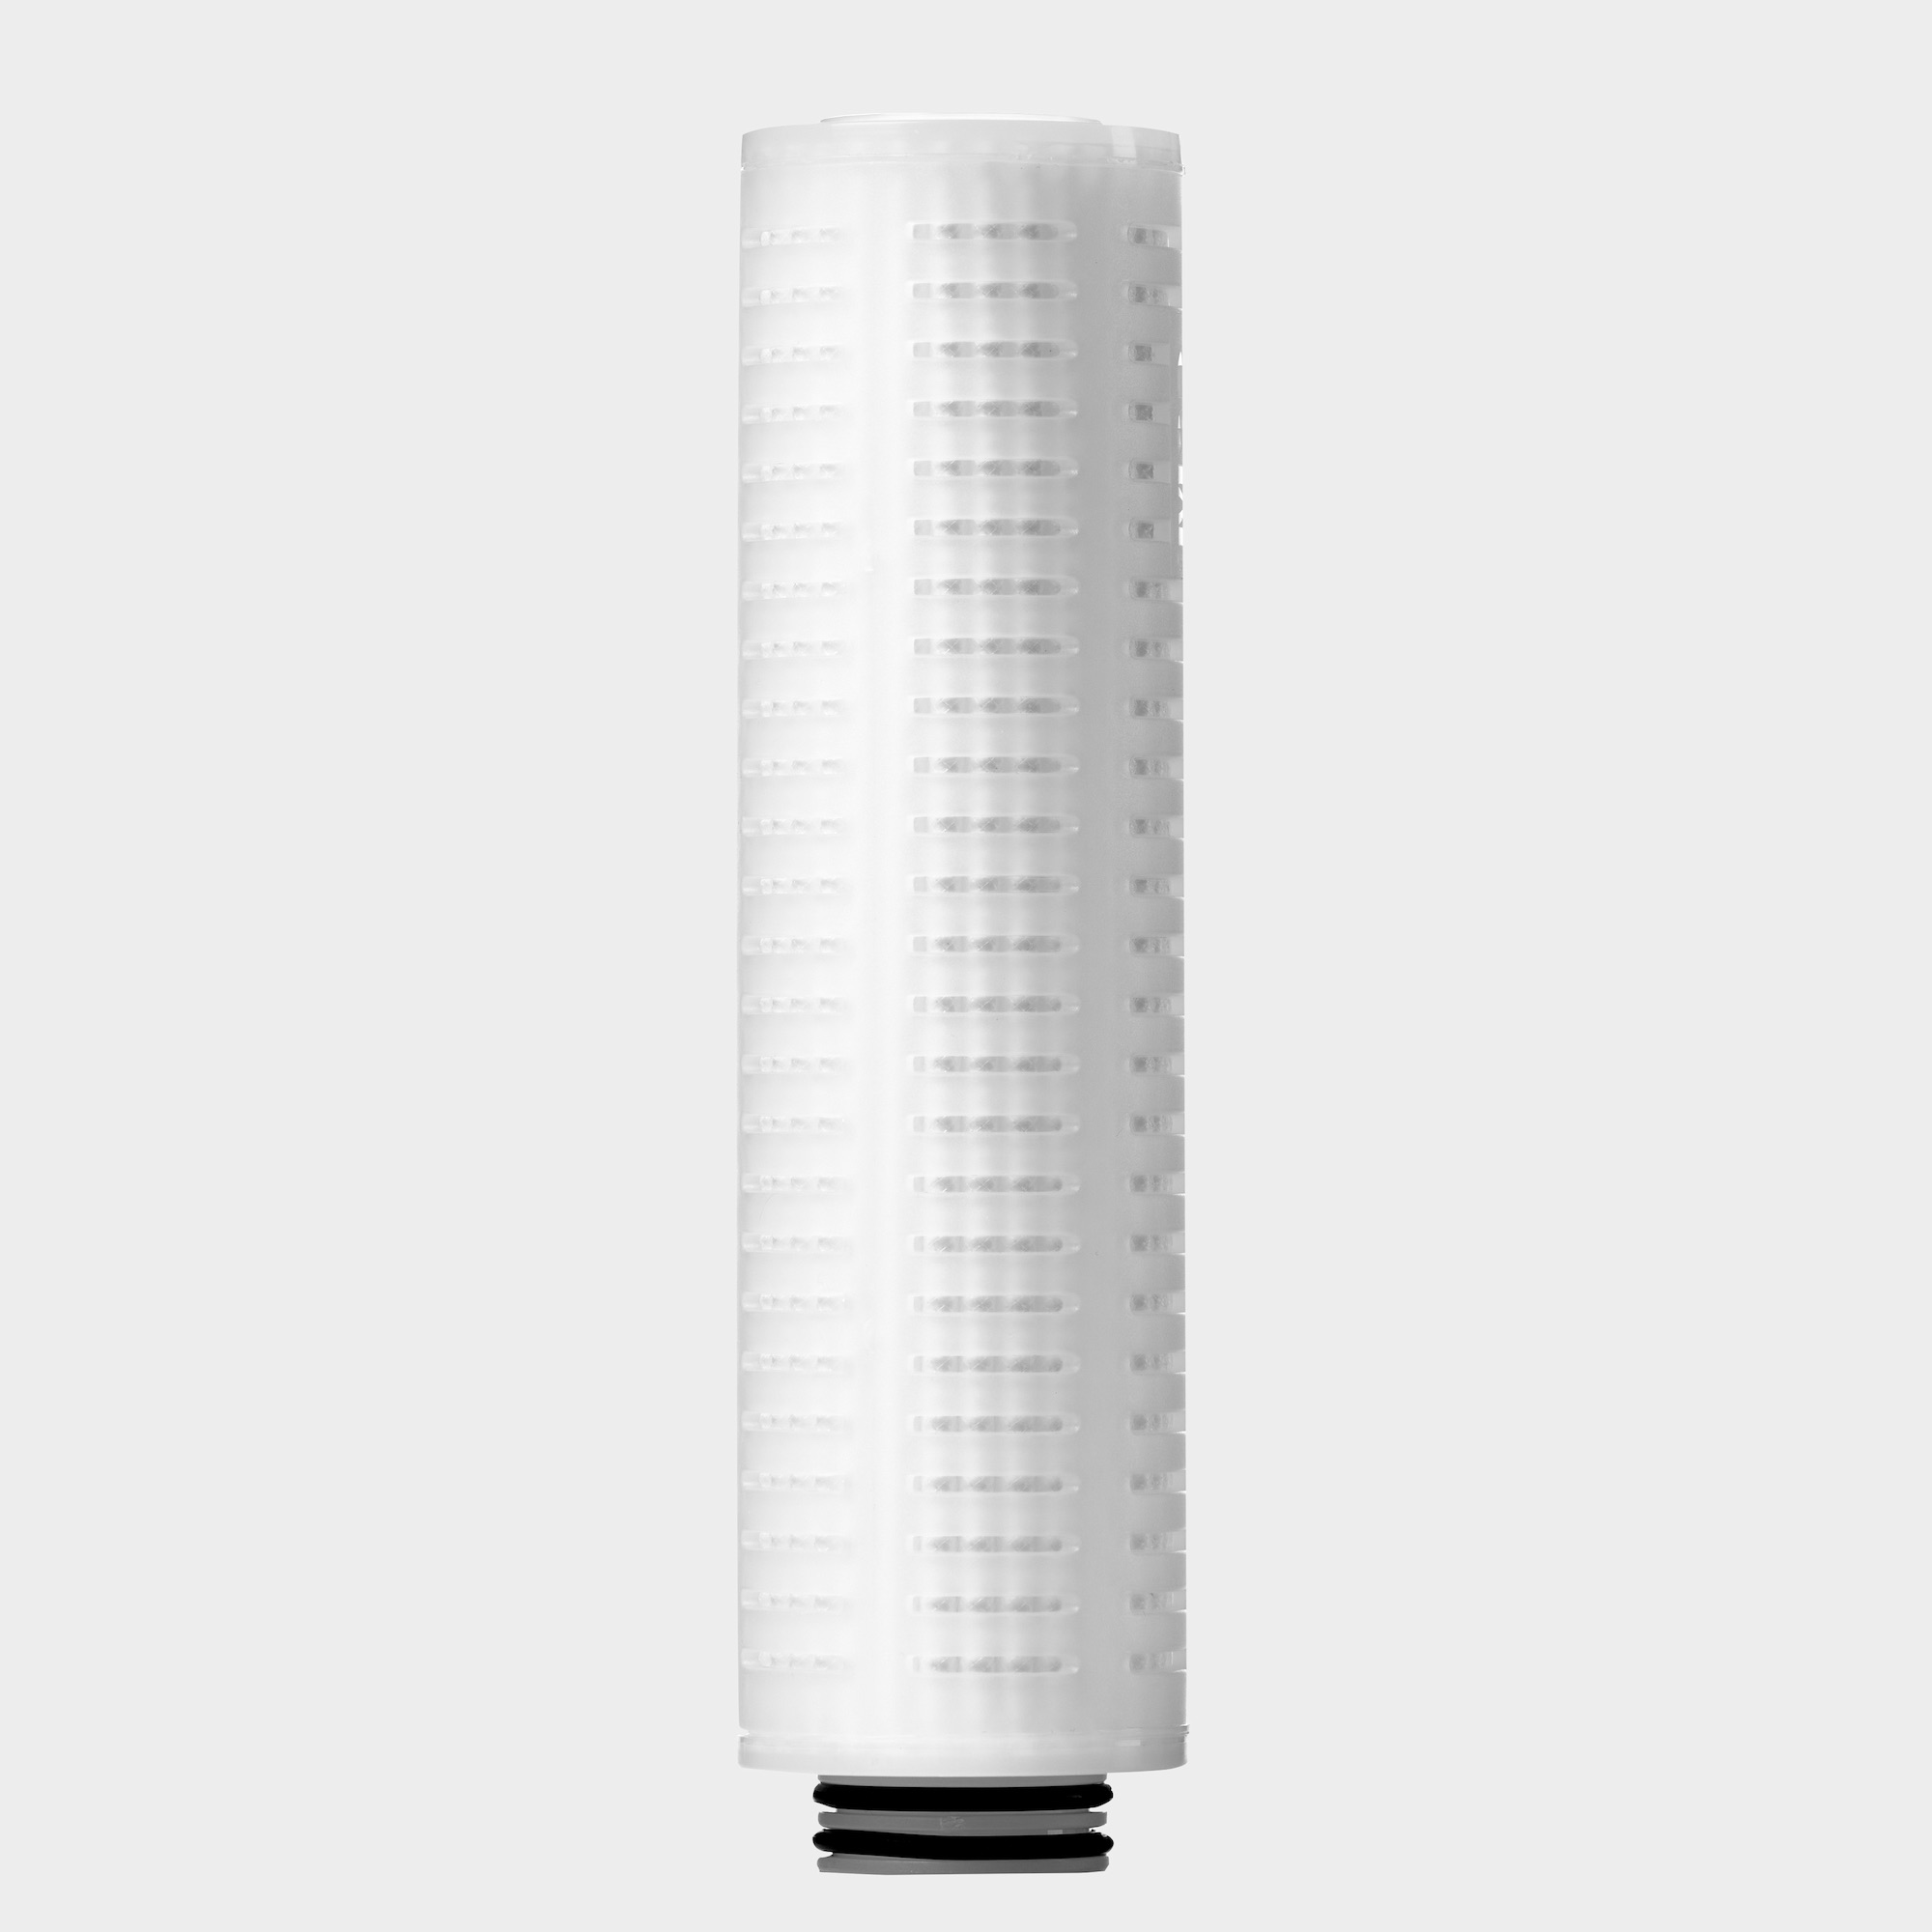 10 inch PP filter cartridge, 4.5 micron pleated PP, Code 0 222/Flat